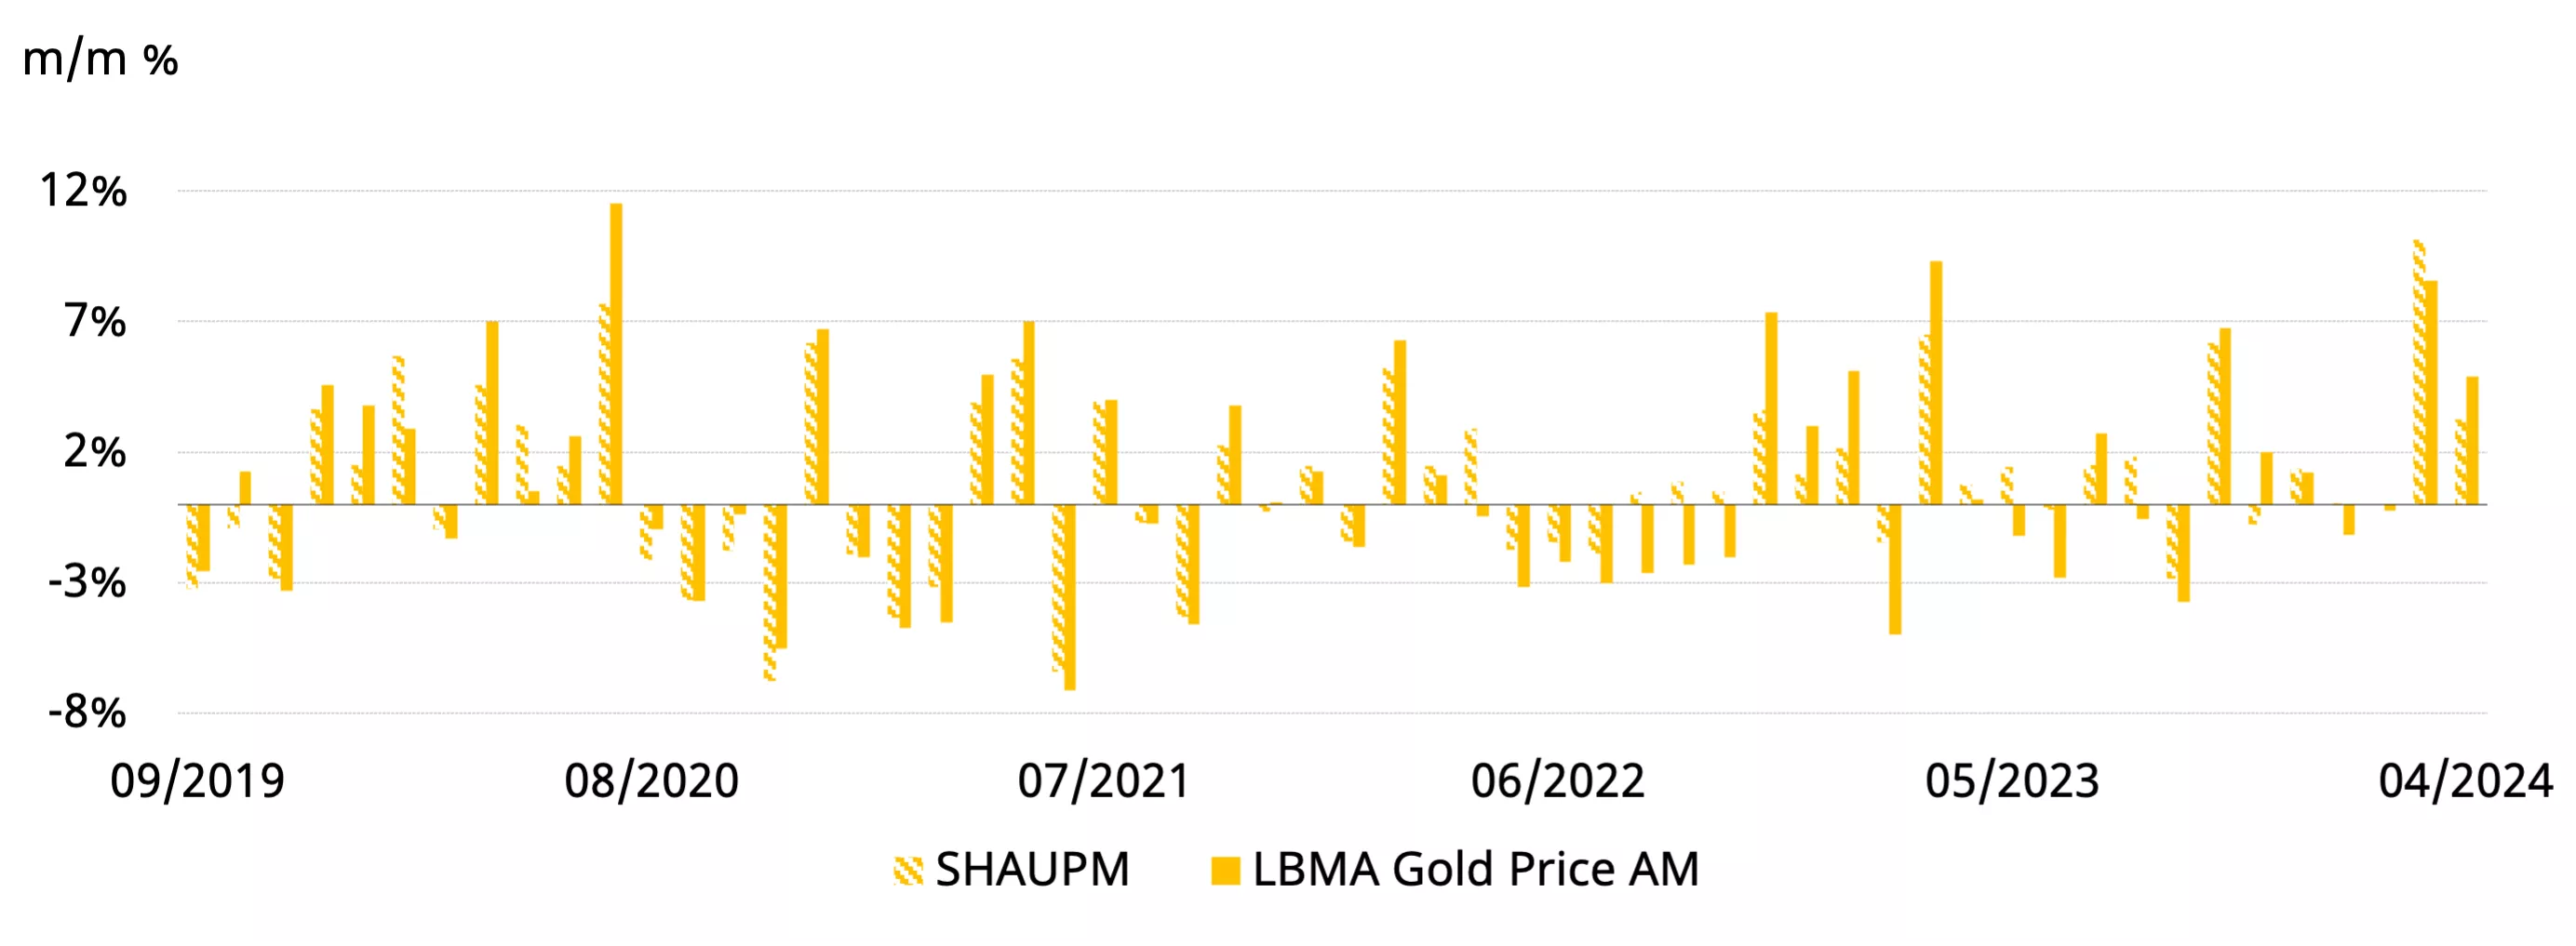 Monthly changes of SHAUPM and LBMA Gold Price AM*